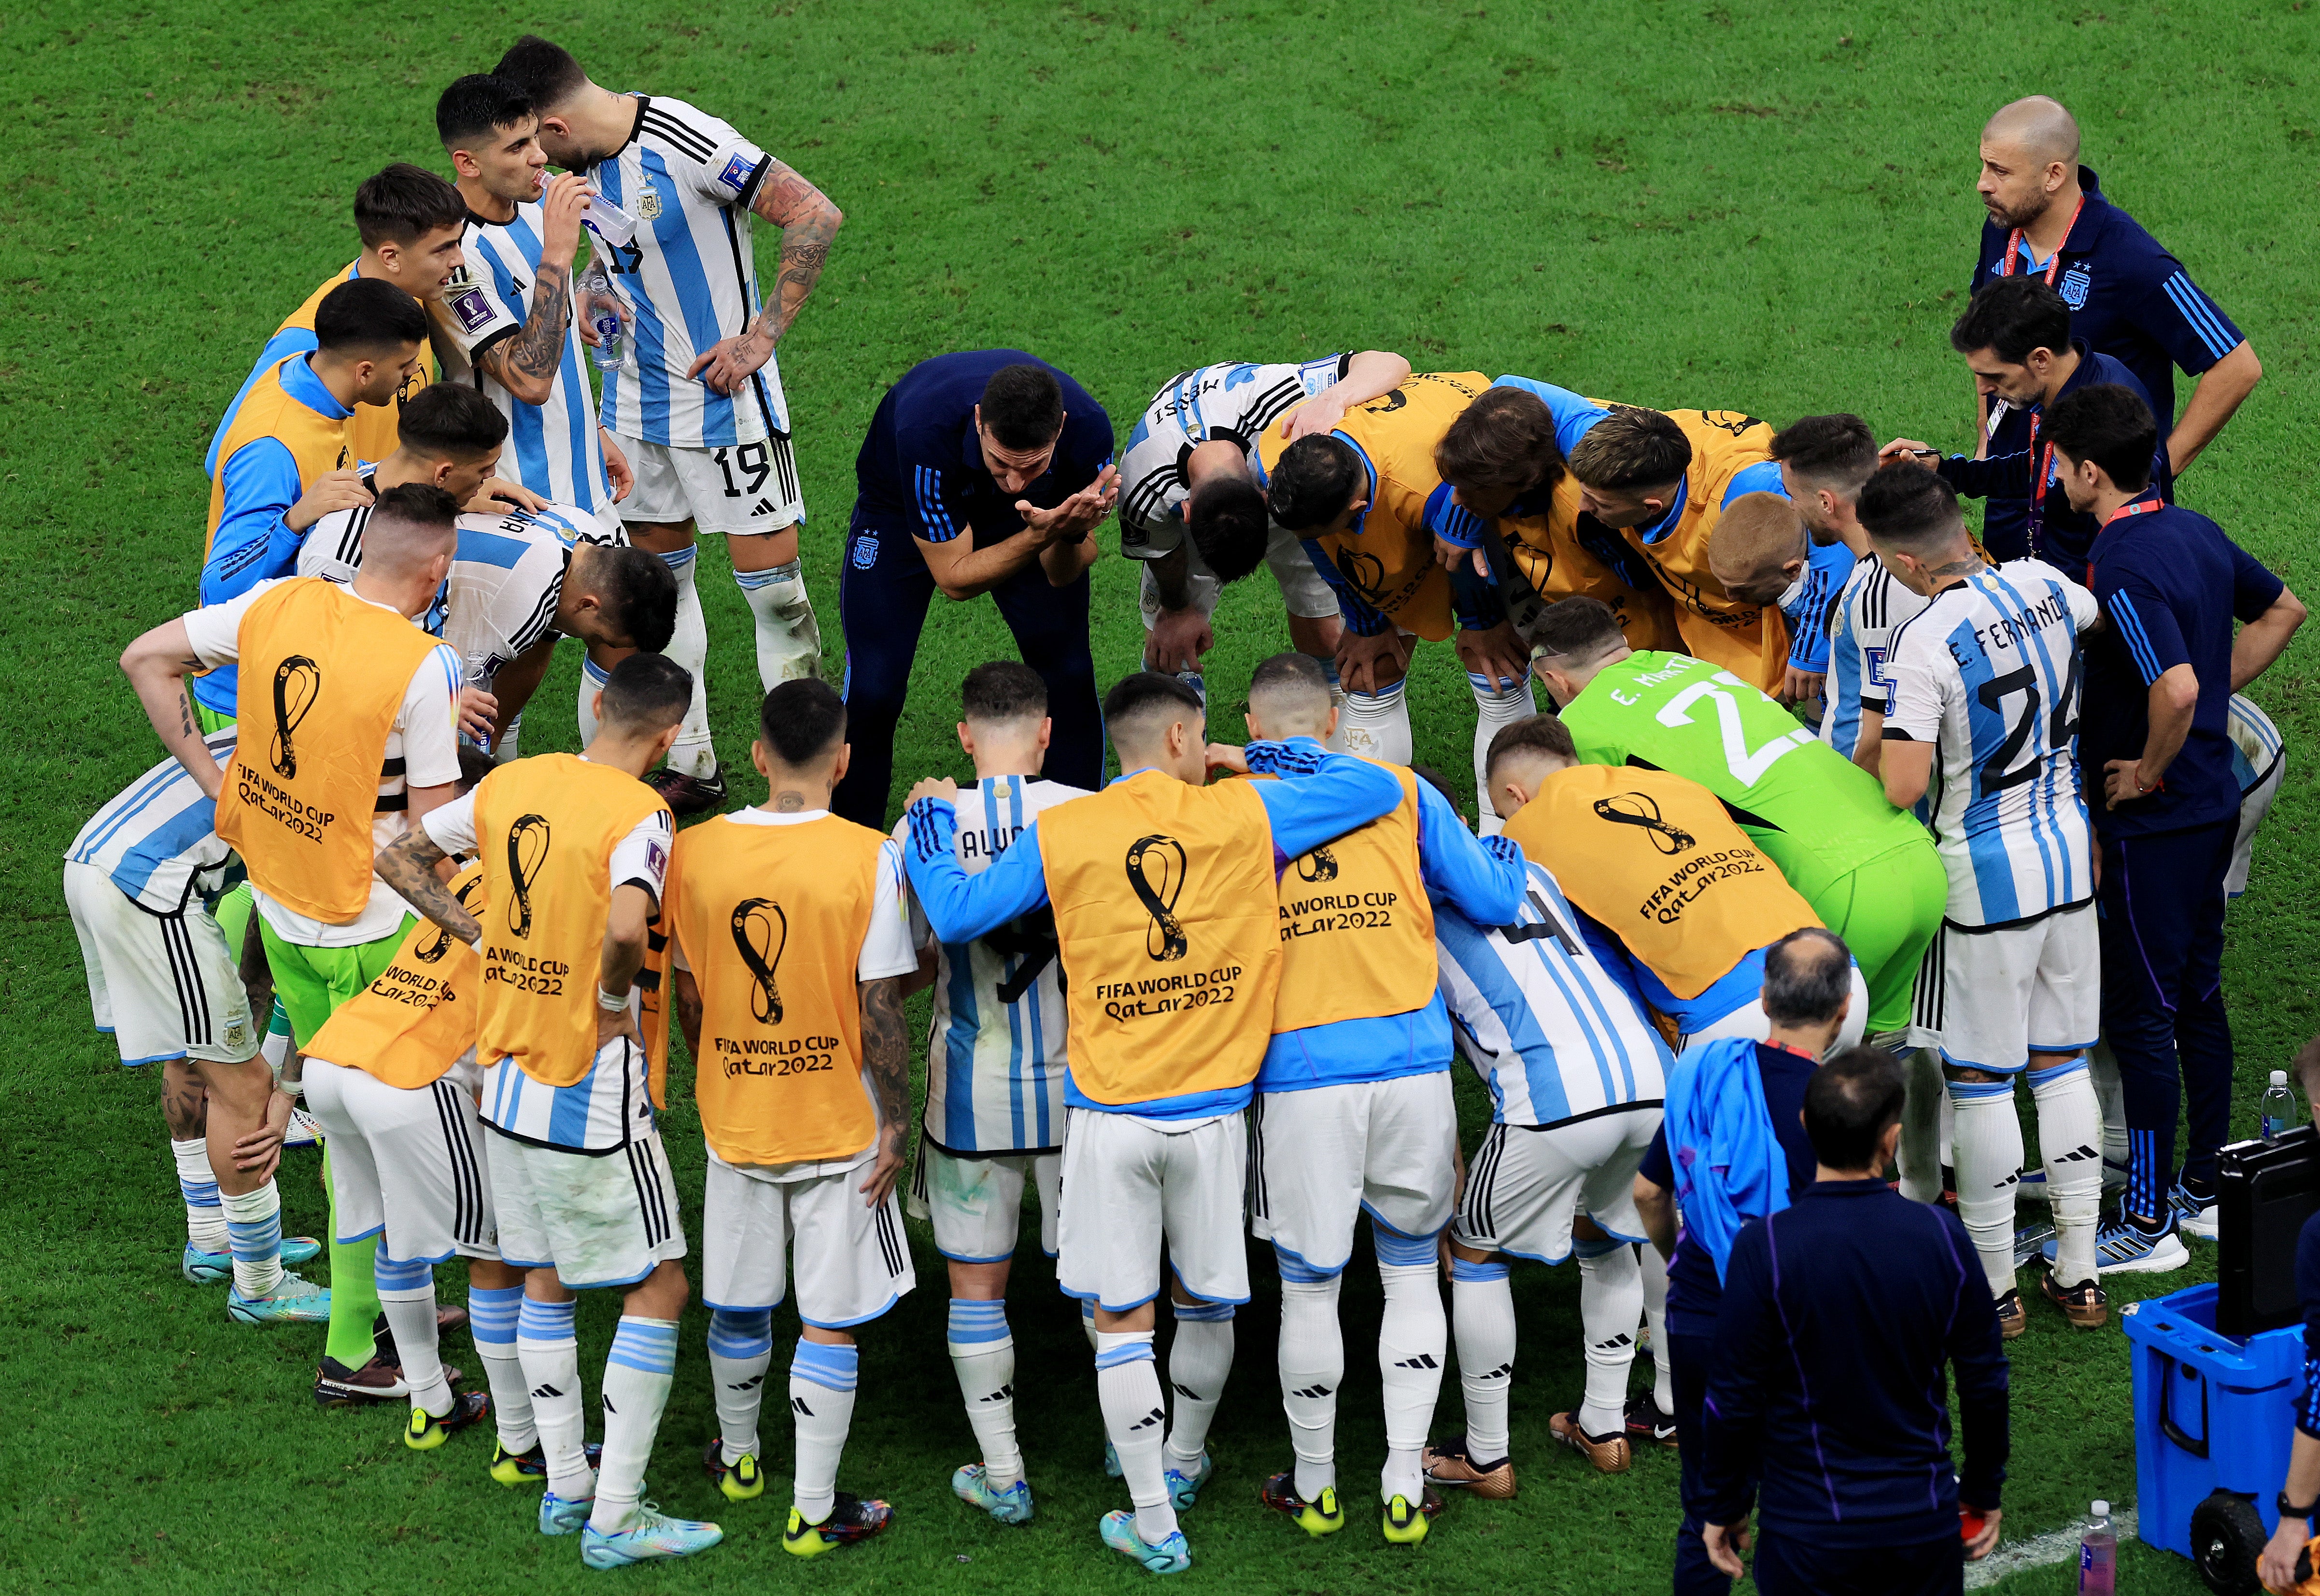 Lionel Scaloni, Head Coach of Argentina, speaks to players before extra time